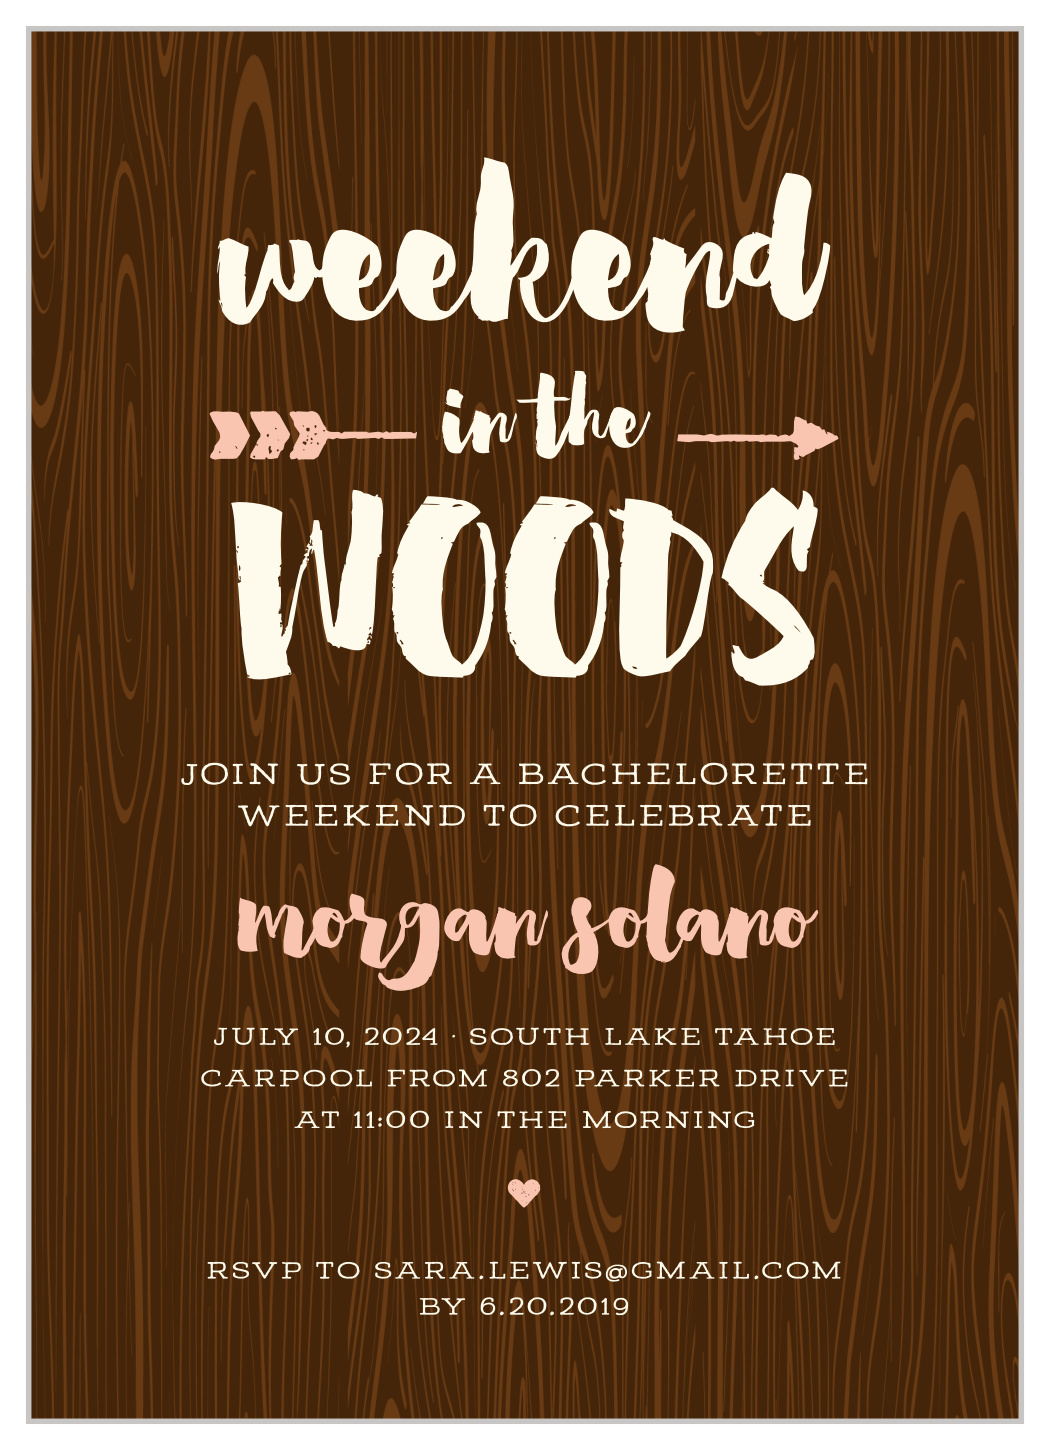 Weekend In The Woods Bachelorette Invitations